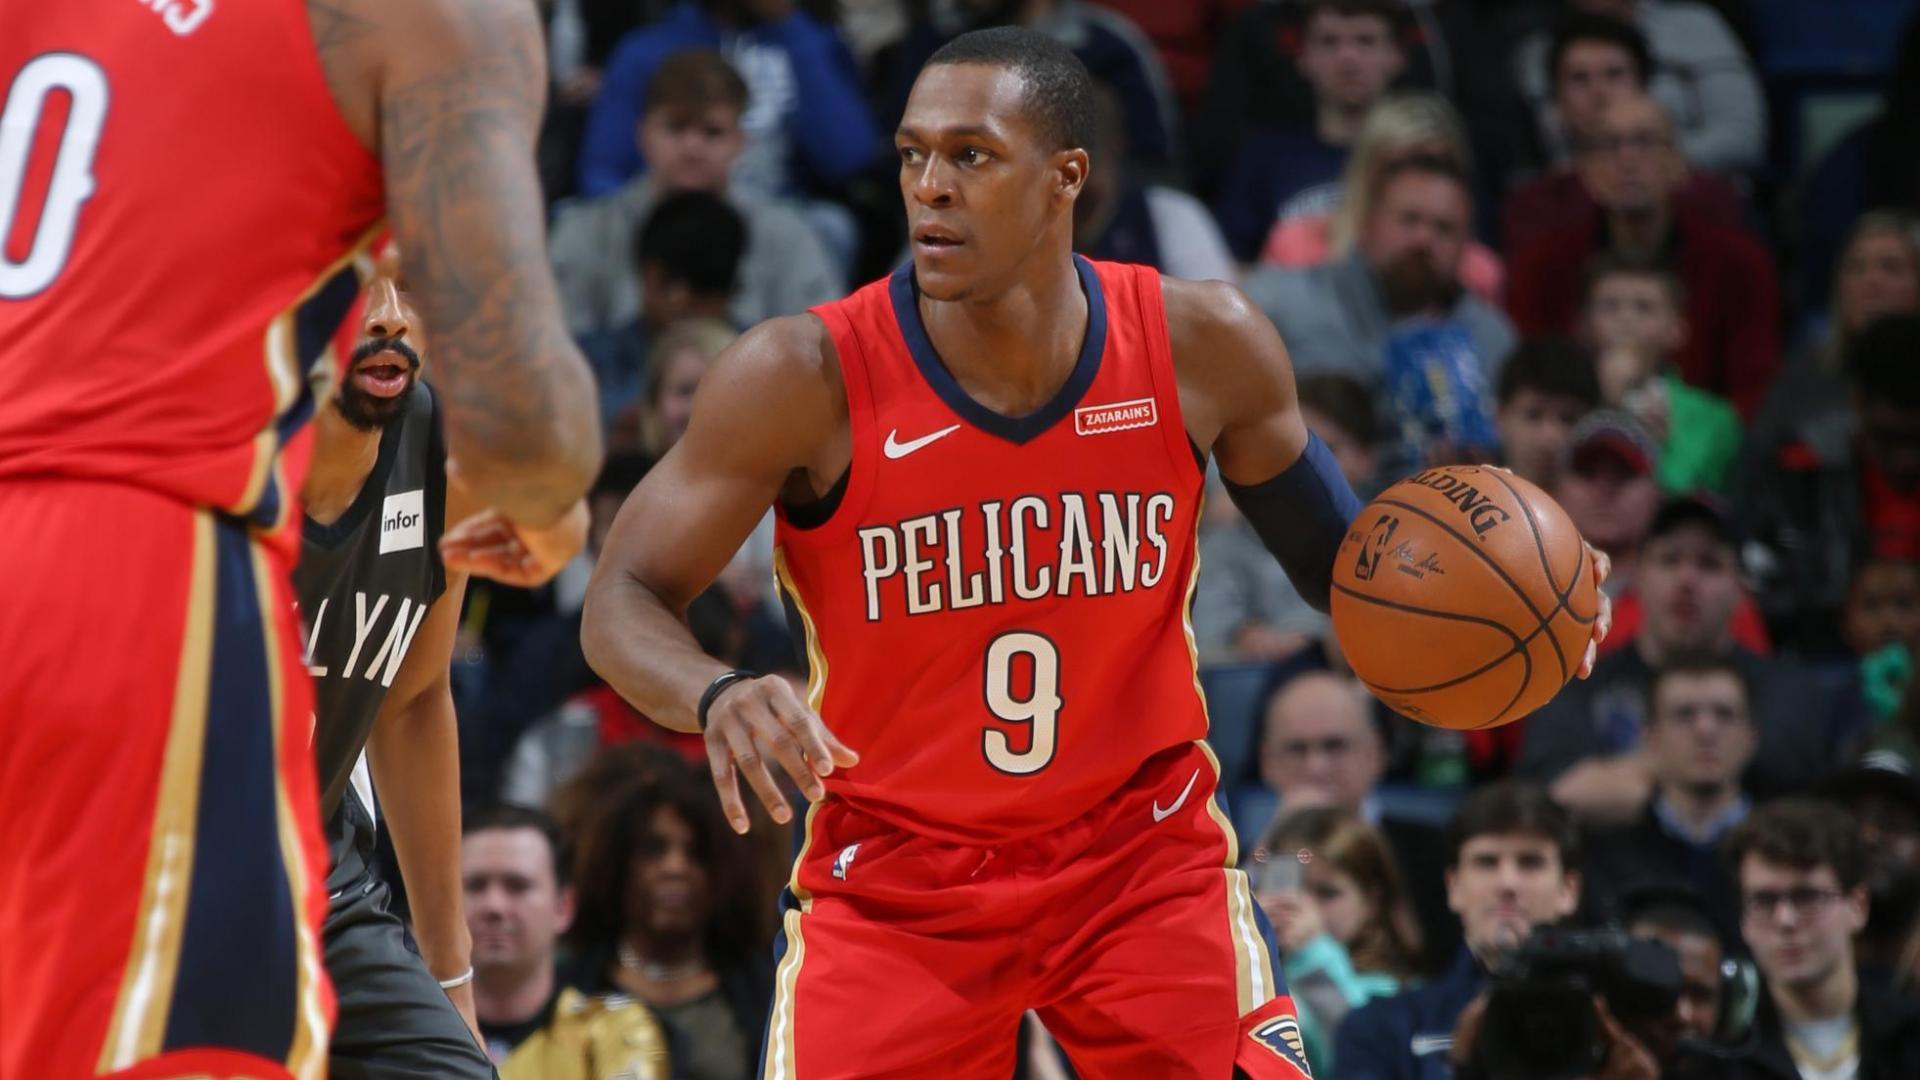 Rondo sets career high with 25 assists